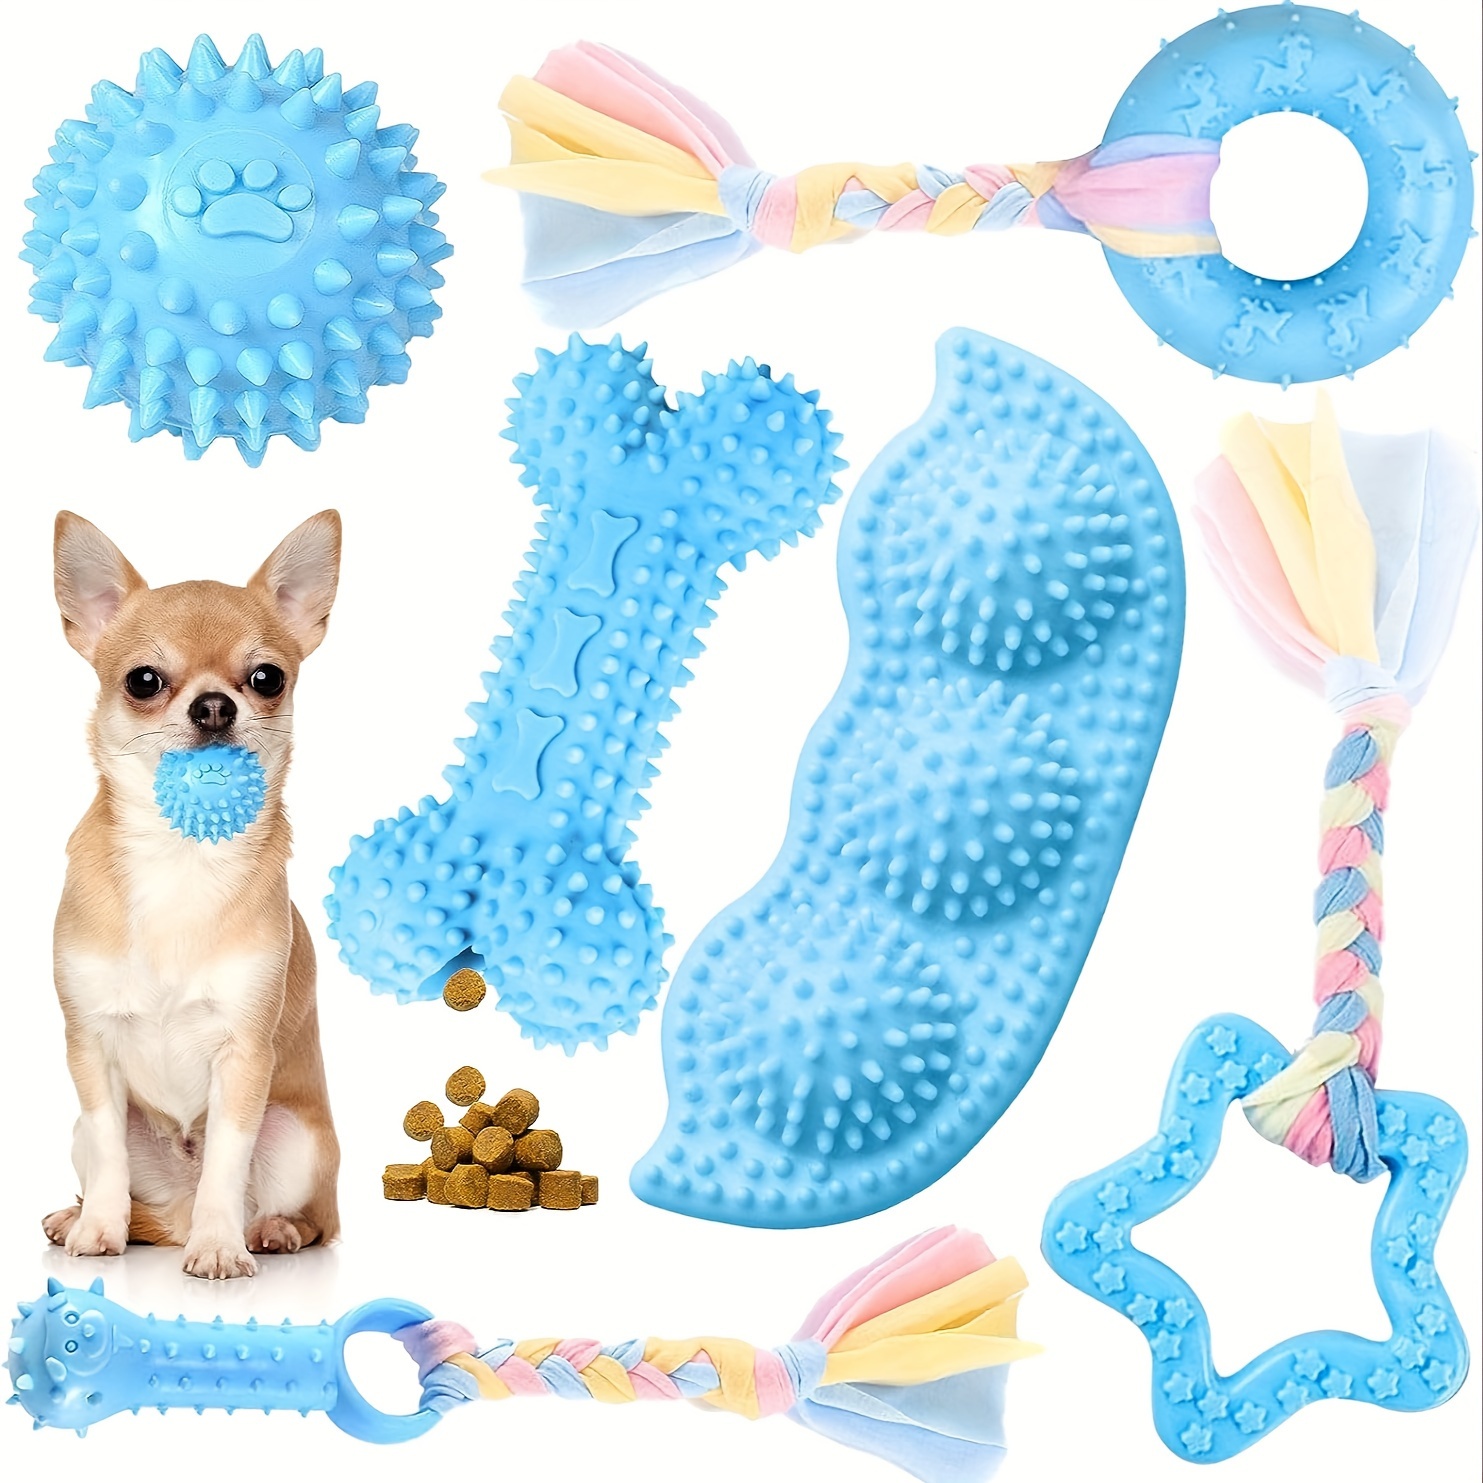 

6 Pack Puppy Chew Toys For Teething, Blue Puppy Toys Small Dog Toys, Soft Rubber Rope Dog Toys, Funny Bone Ball, Cleaning Teeth Dog Chew Toys, Puppy Teething Toys